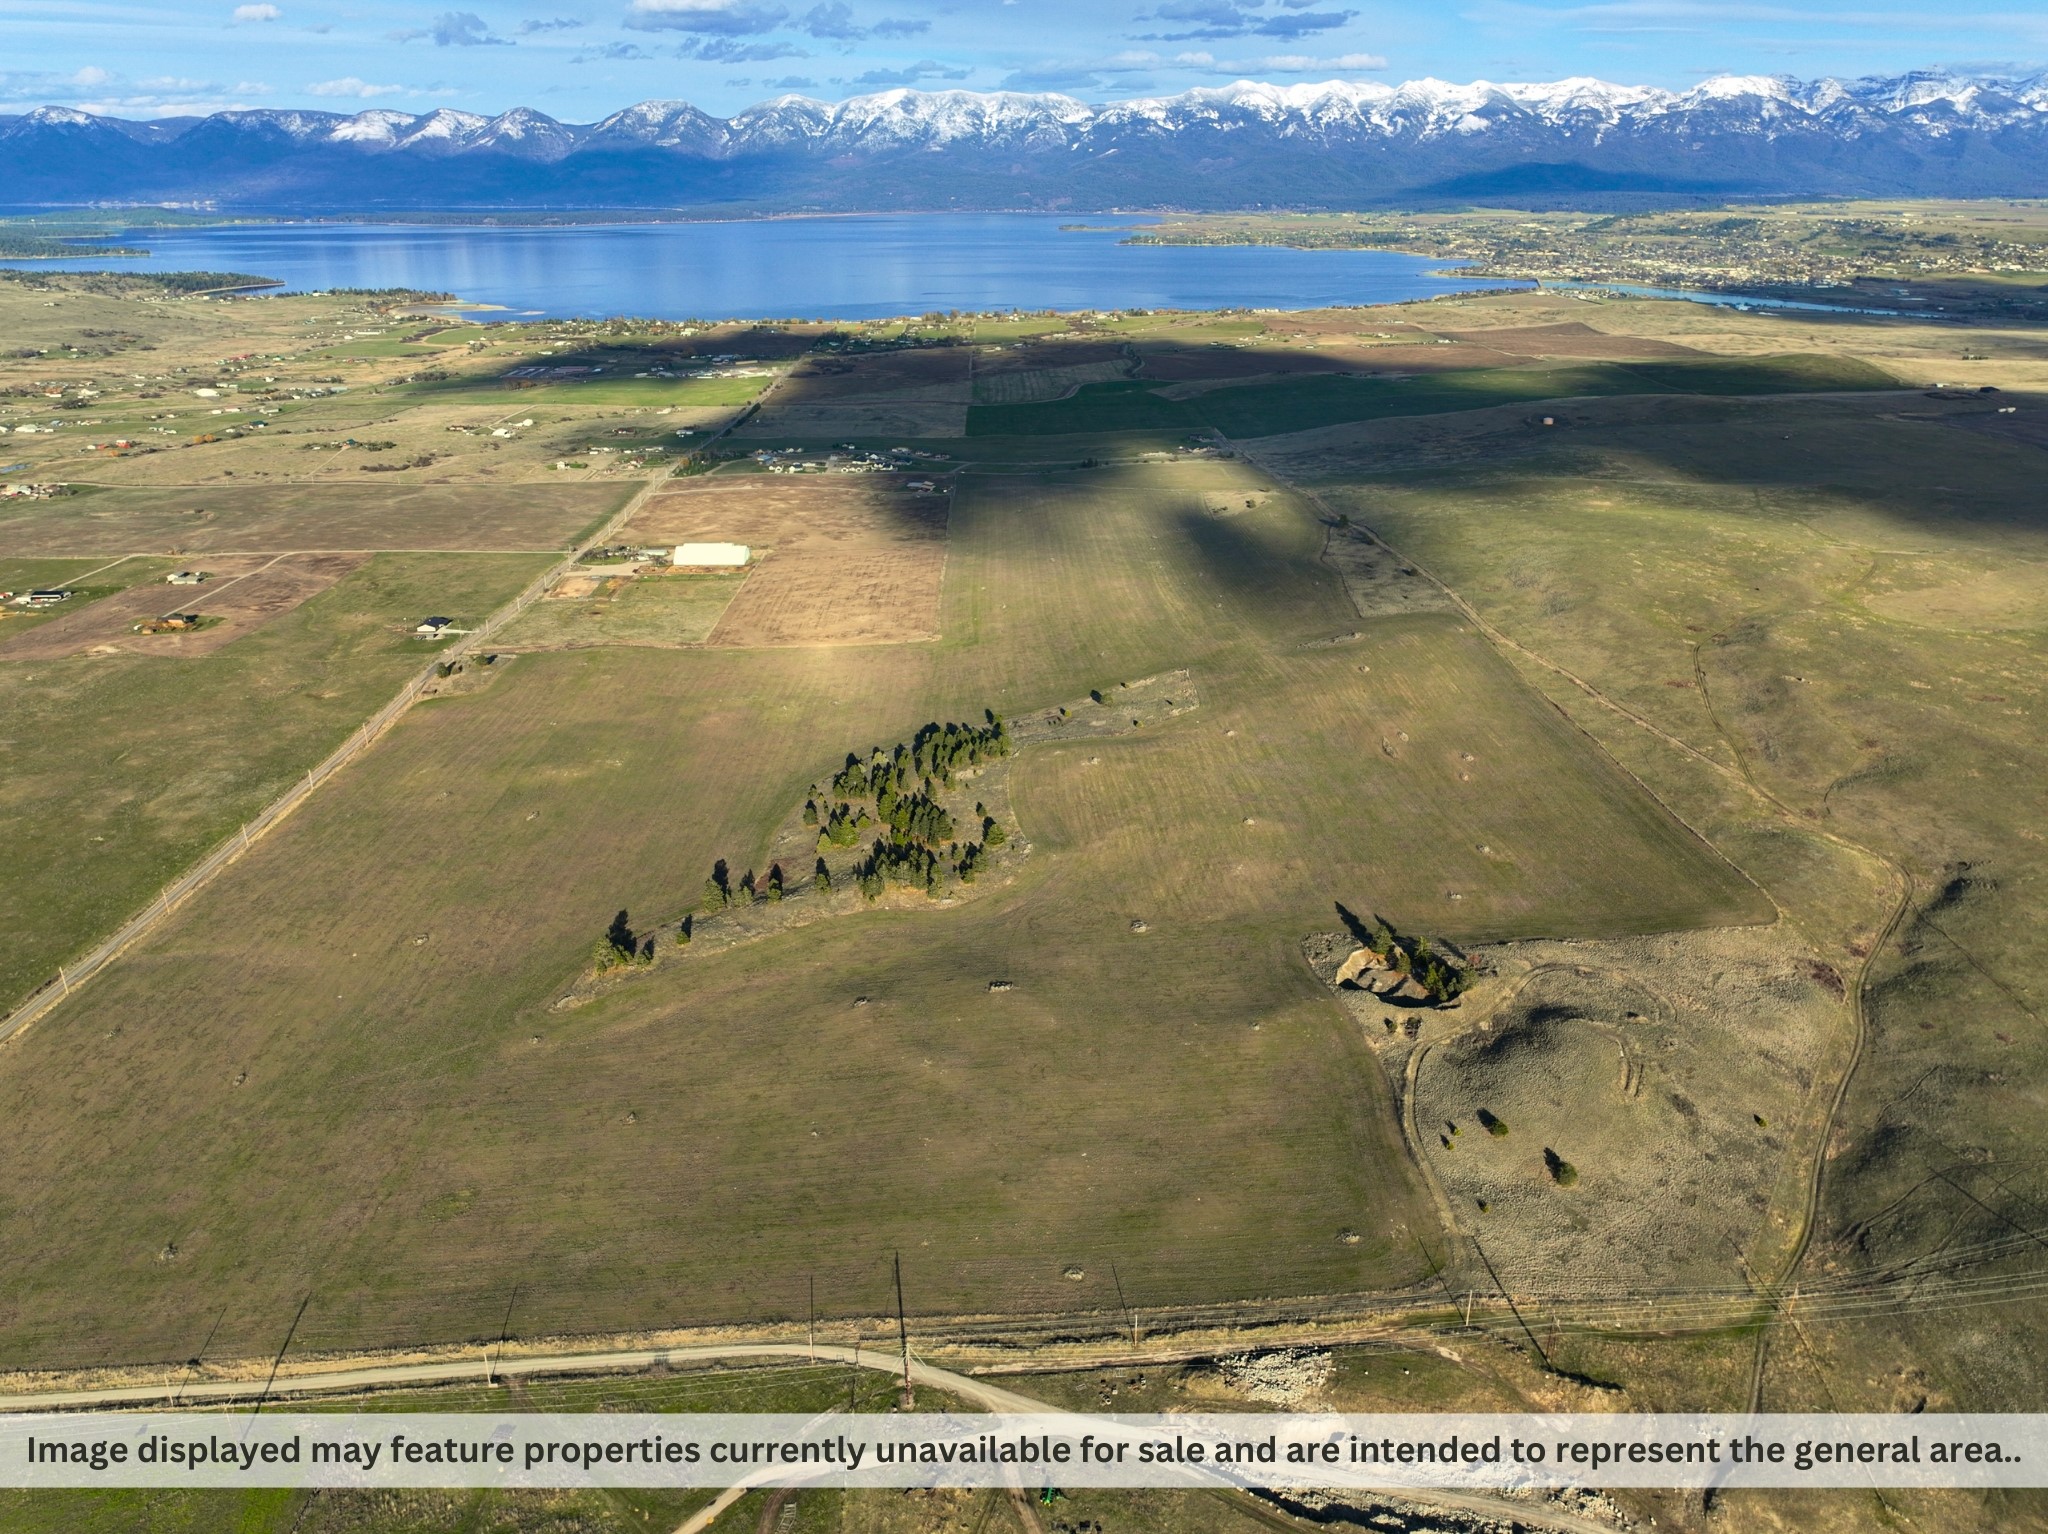 Discover this versatile 240-acre tract, minutes from Polson, MT, offering unzoned land with potential for substantial development. Located off Tower Road, the property features varied terrain with stunning lake views and is currently income-producing with an agricultural lease for alfalfa. Perfect for developers looking to create a residential subdivision or for continuing agricultural operations. Its proximity to other developments and easy access enhances its appeal for both private estate and commercial uses. Explore the endless possibilities by contacting us today for more details or to arrange a viewing. For more info text: BRE to: 59559. For additional details call Jeremy Williams @ 406-926-6767 or your Real Estate professional.